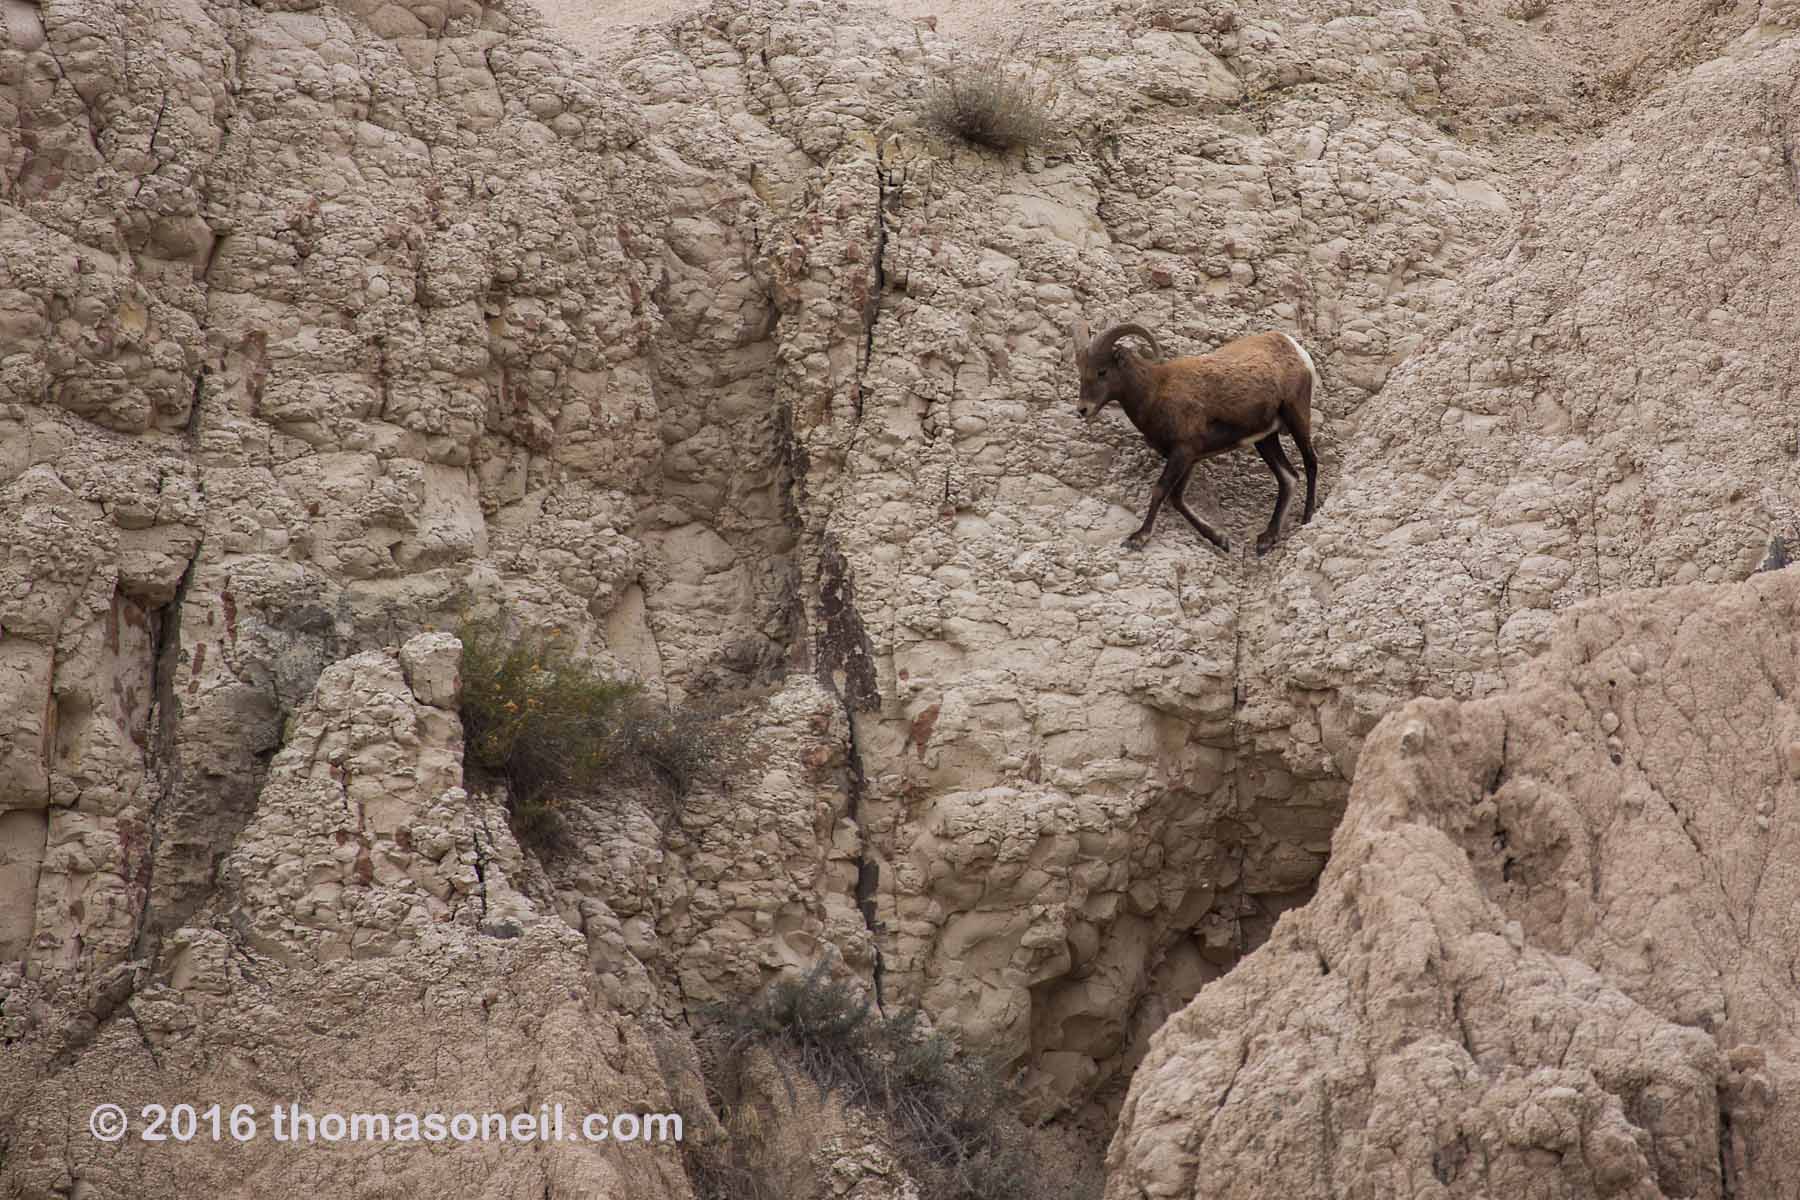 Bighorn sheep walking across the face of a cliff in the Badlands.  Click for next photo.